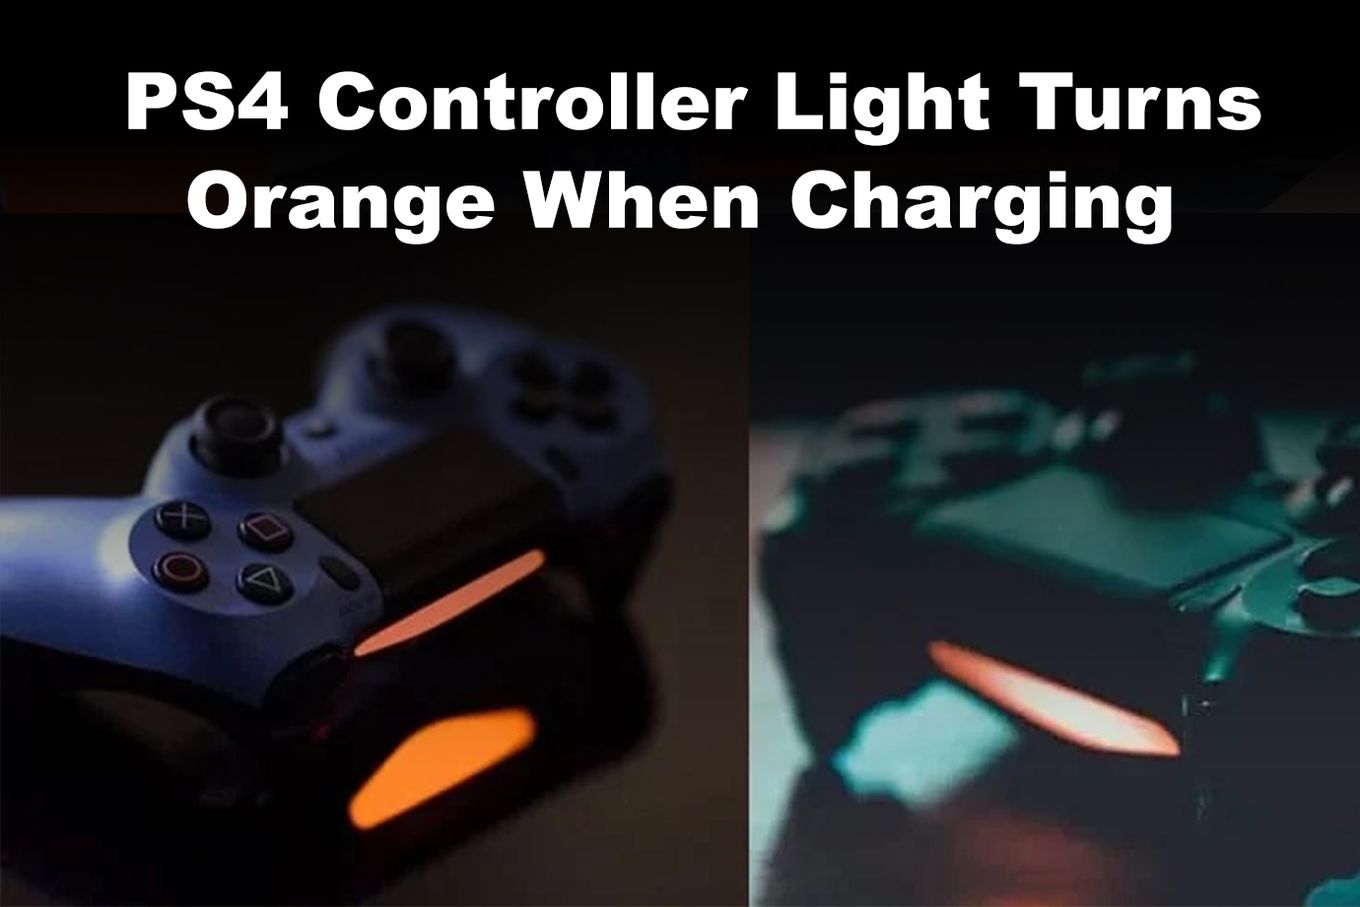 A PS4 controller light turns orange when charging